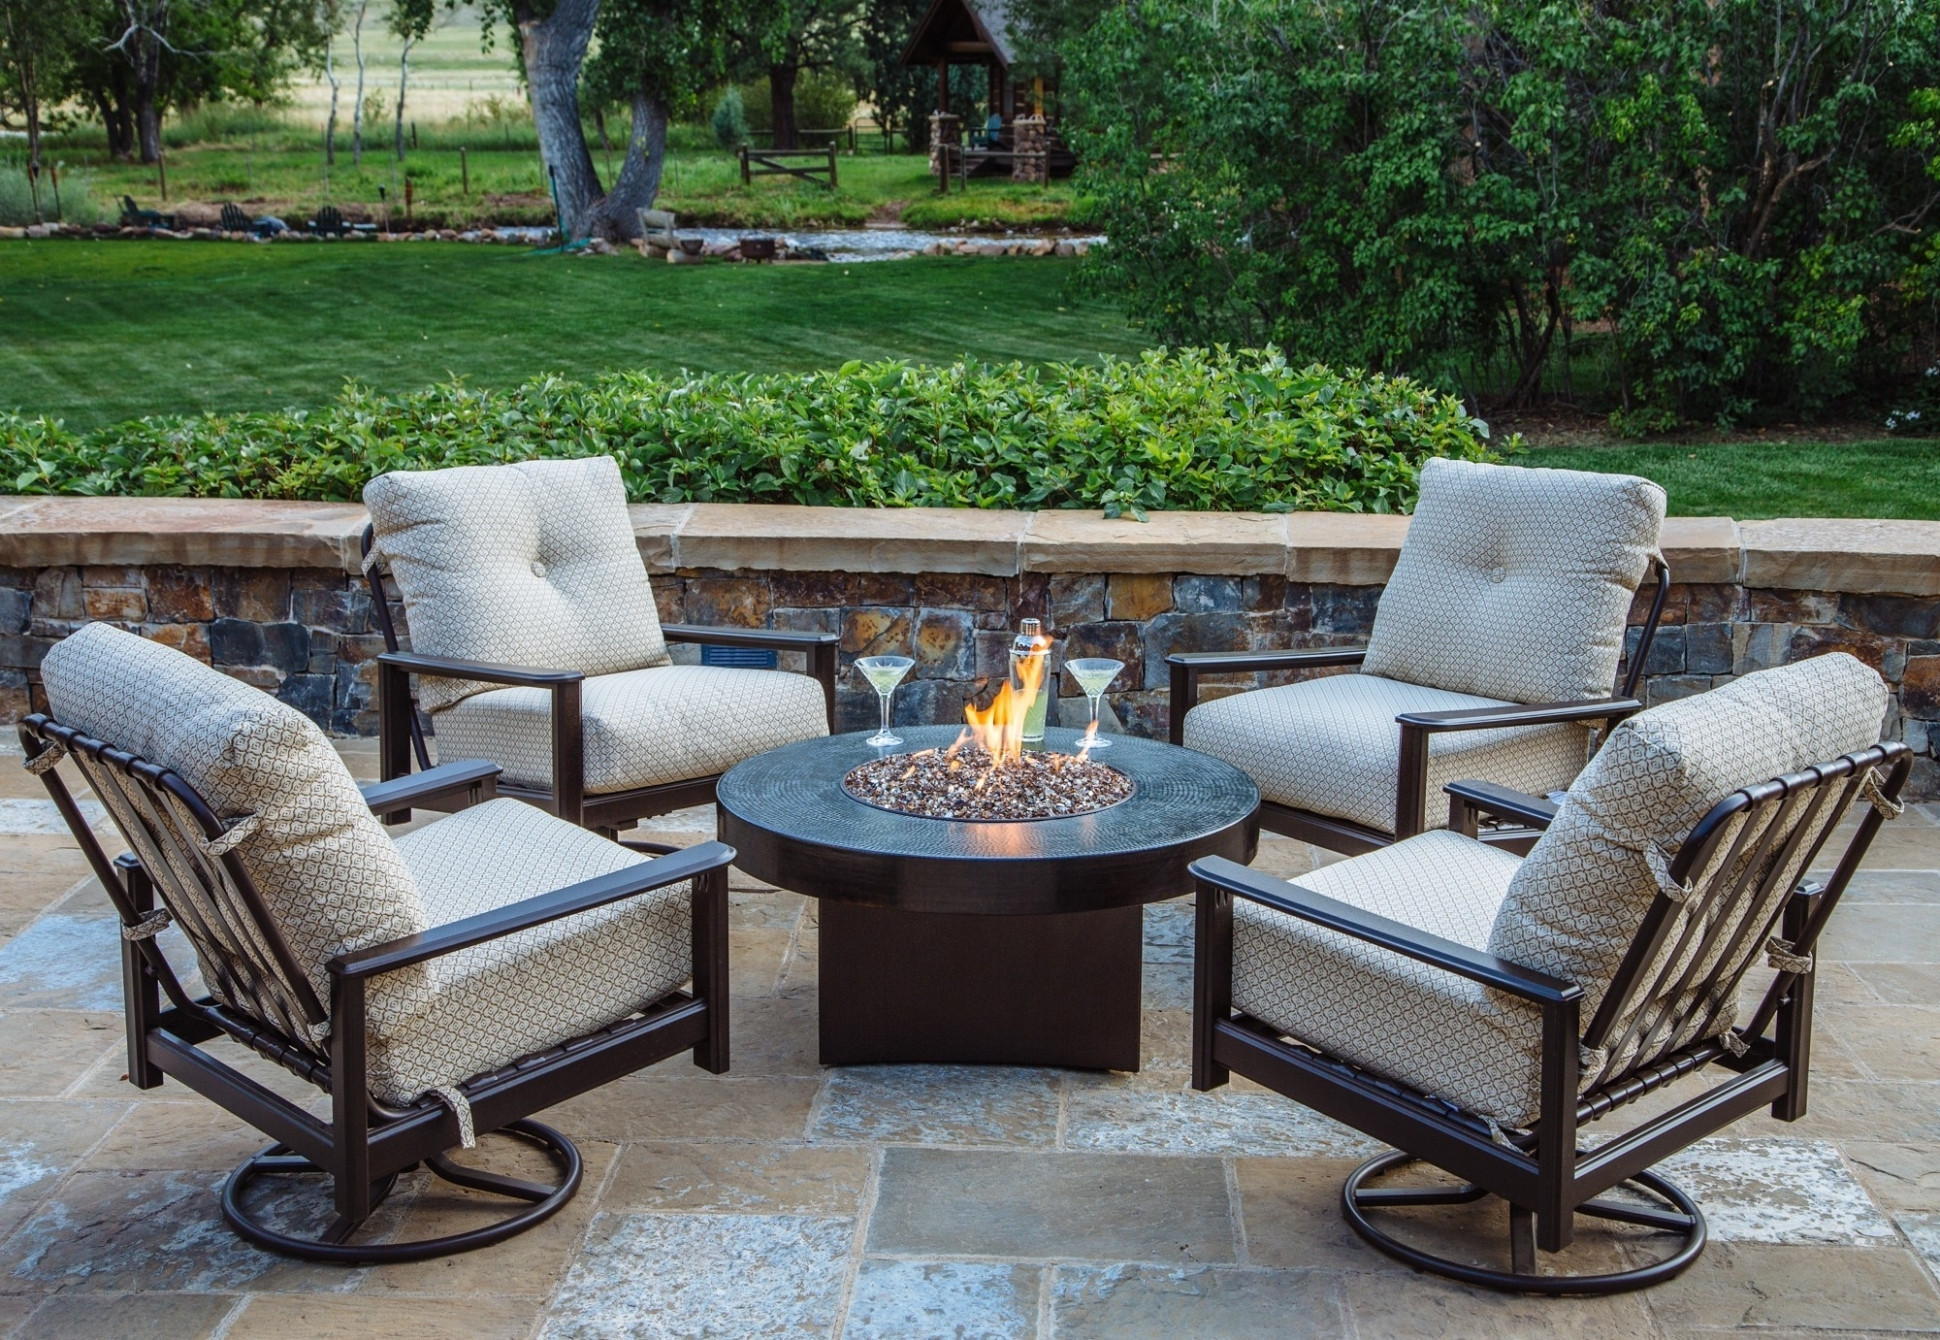 Outdoor Fire Pit Patio Sets Pit fire sets chat patio hayneedle outdoor furniture gas conversation seating san miguel aluminum cast table belham living pits piece